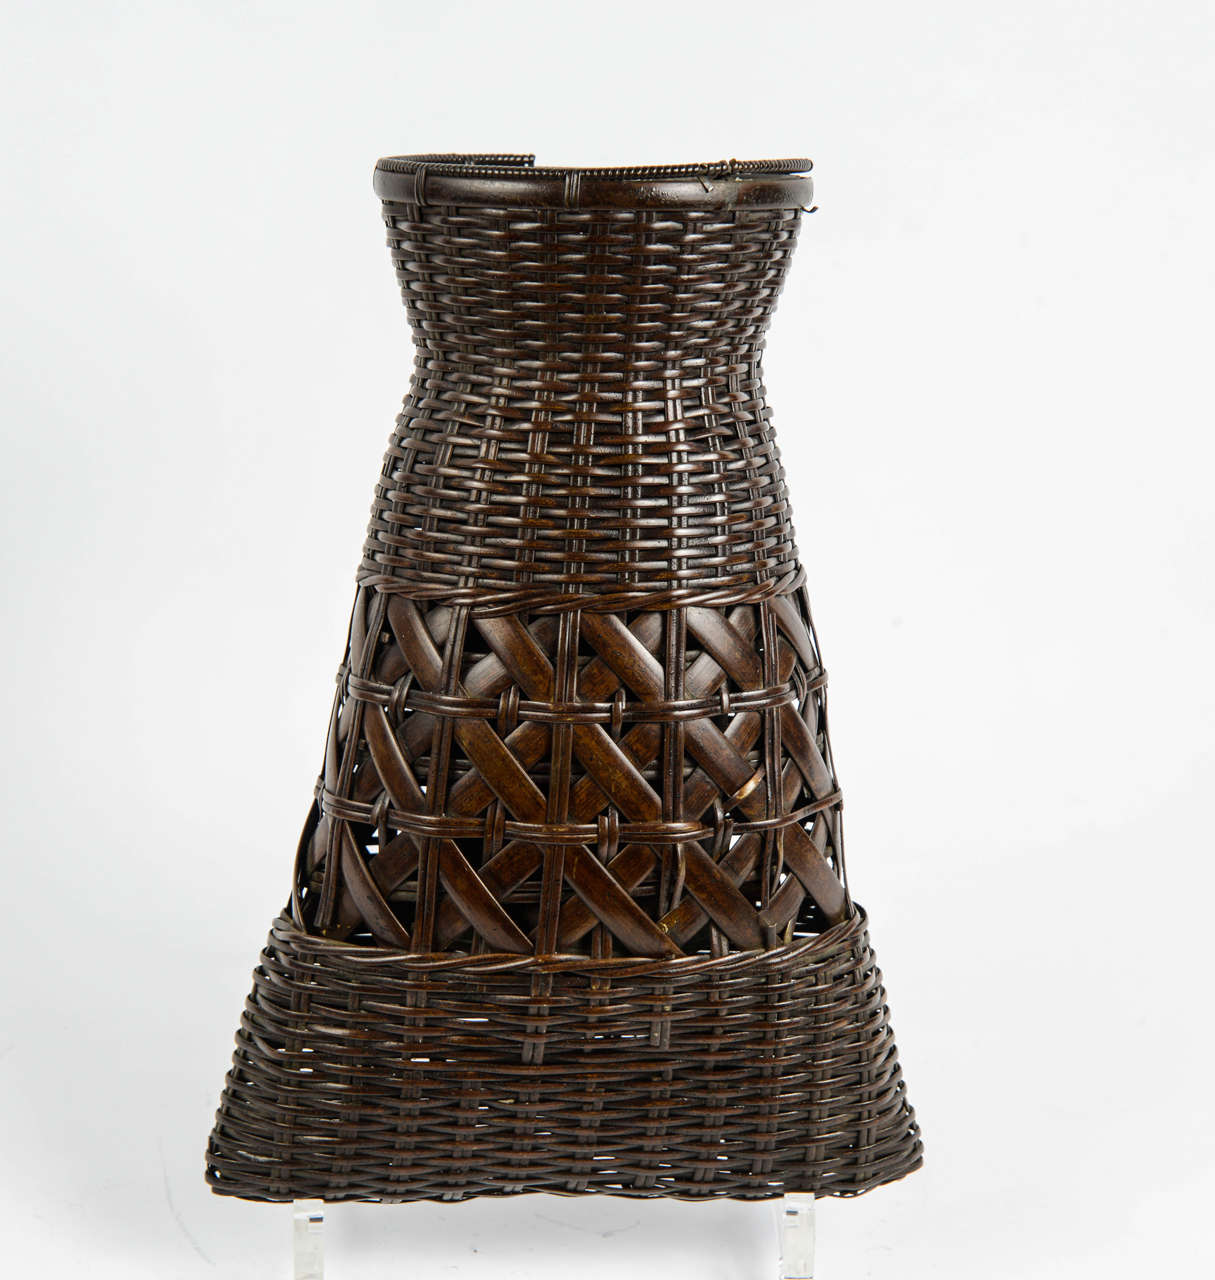 Ikebana bronze imitating basketry, a small suspension handle on the back. A small container inside.

Very beautiful work.